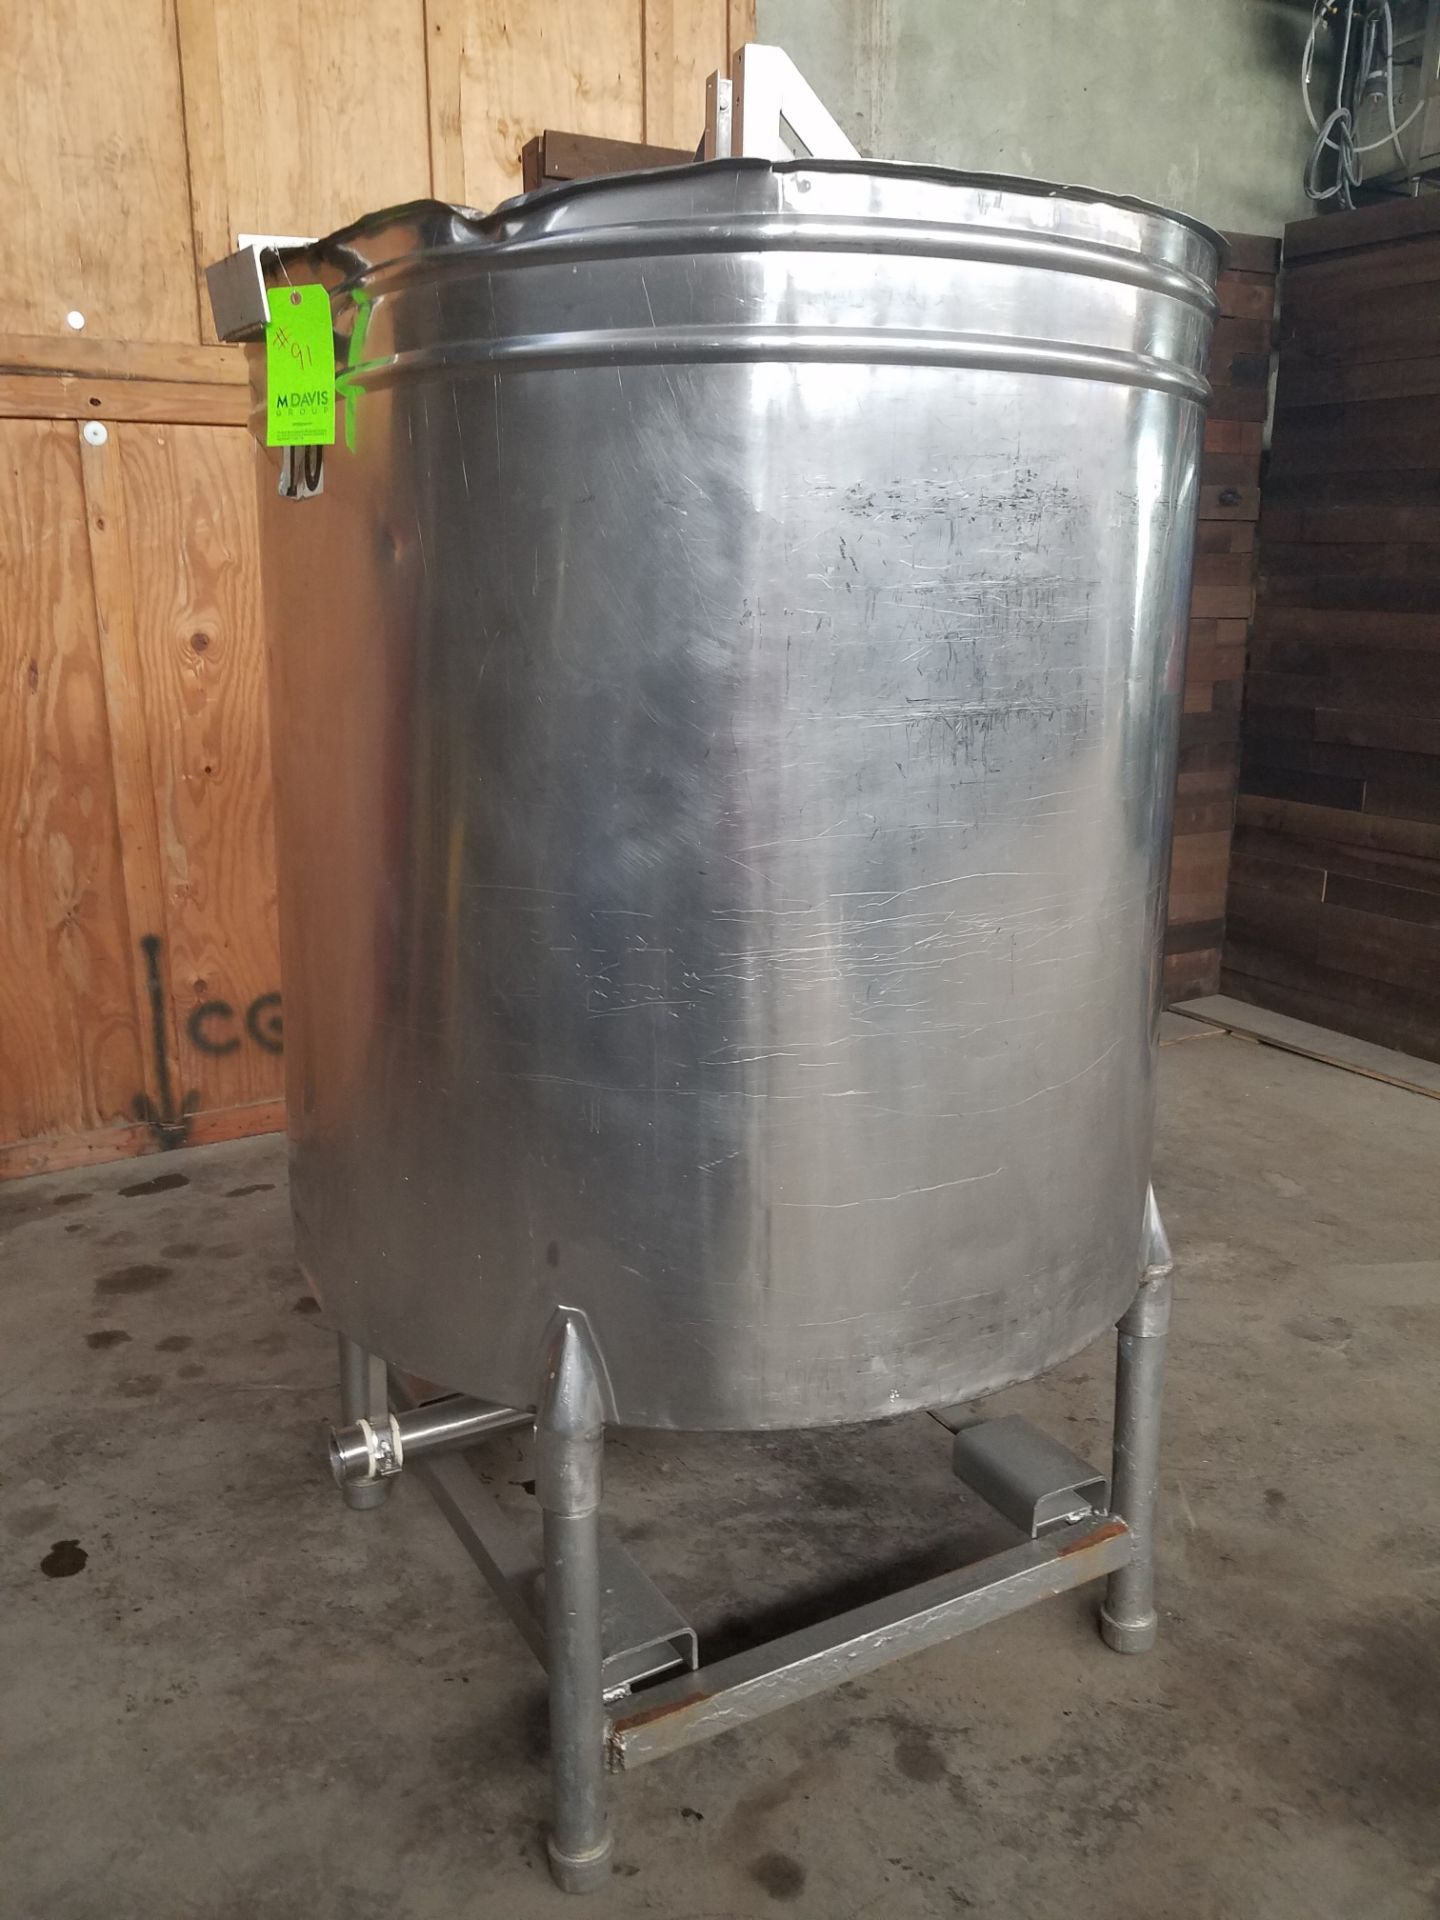 42" wide x 48" high Stainless Steel Mixing Tank (Loading, Rigging & Site Management Fee $200.00